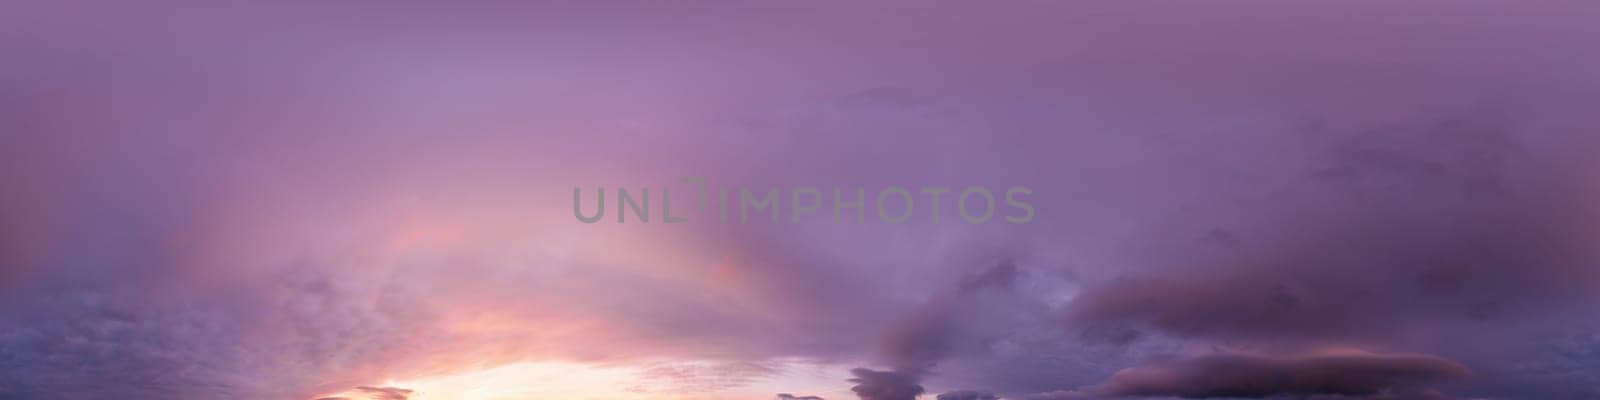 Sunset sky panorama with bright glowing pink Cumulus clouds. HDR 360 seamless spherical panorama. Full zenith or sky dome for 3D visualization, sky replacement for aerial drone panoramas. by Matiunina